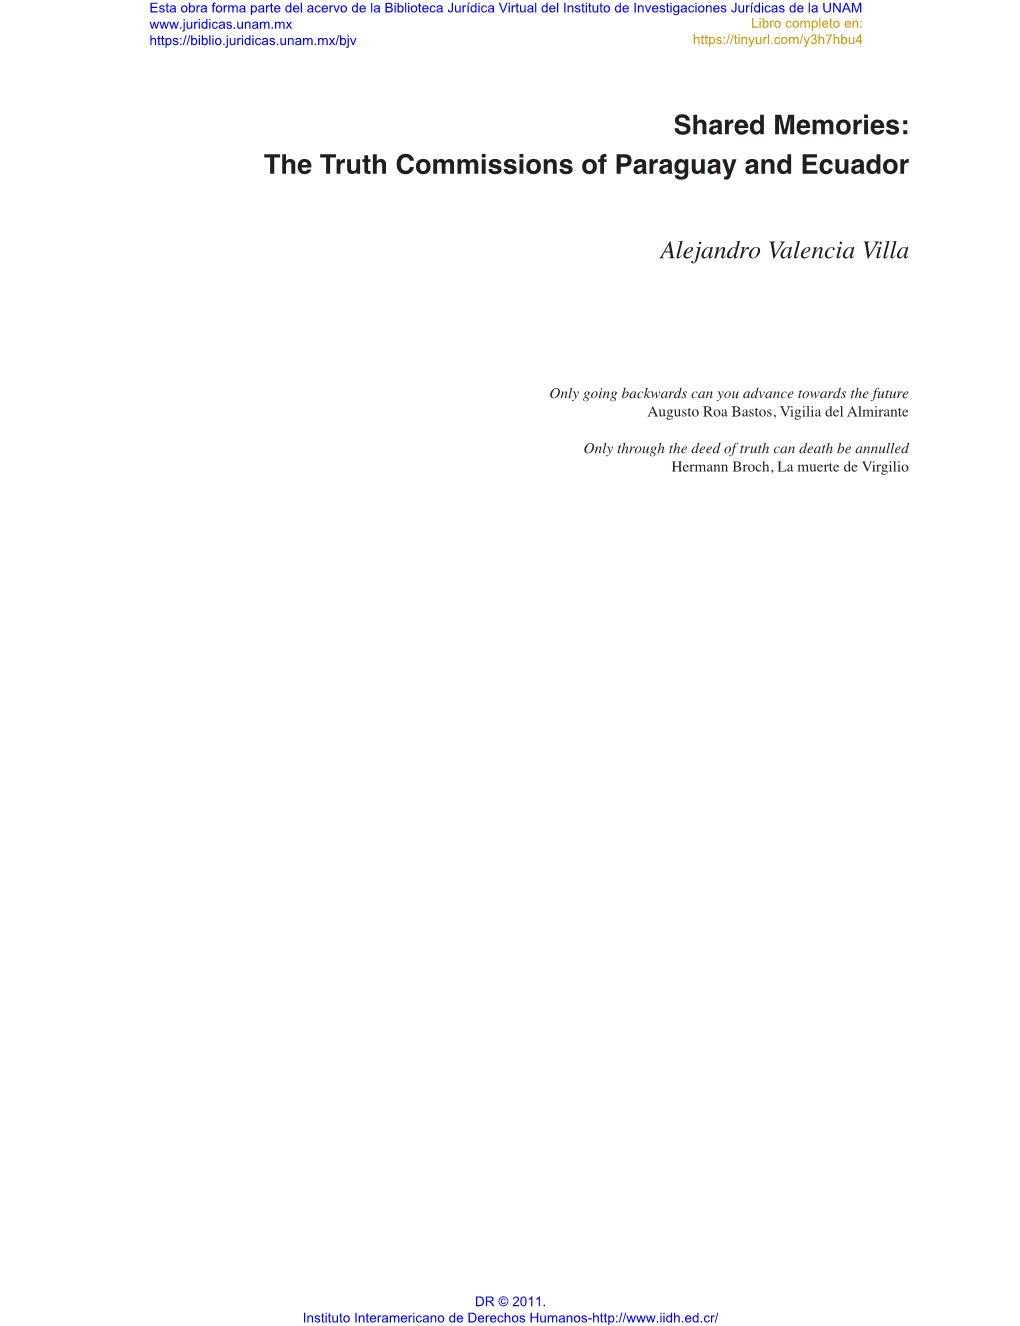 The Truth Commissions of Paraguay and Ecuador